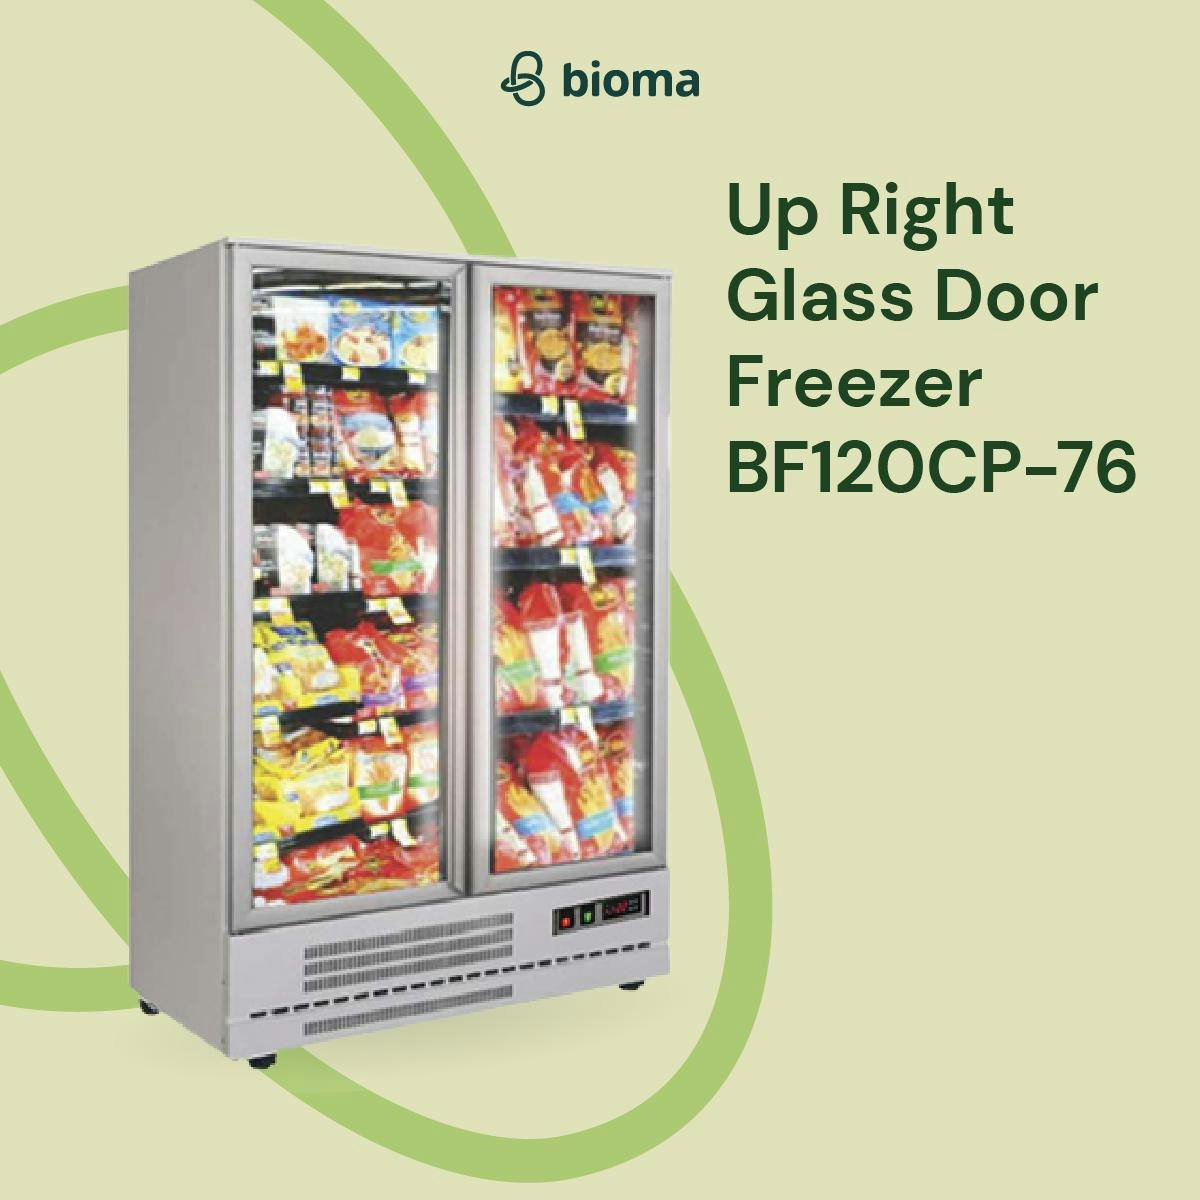 Image 50272 Up Right Glass Door Freezer BF120CP-76